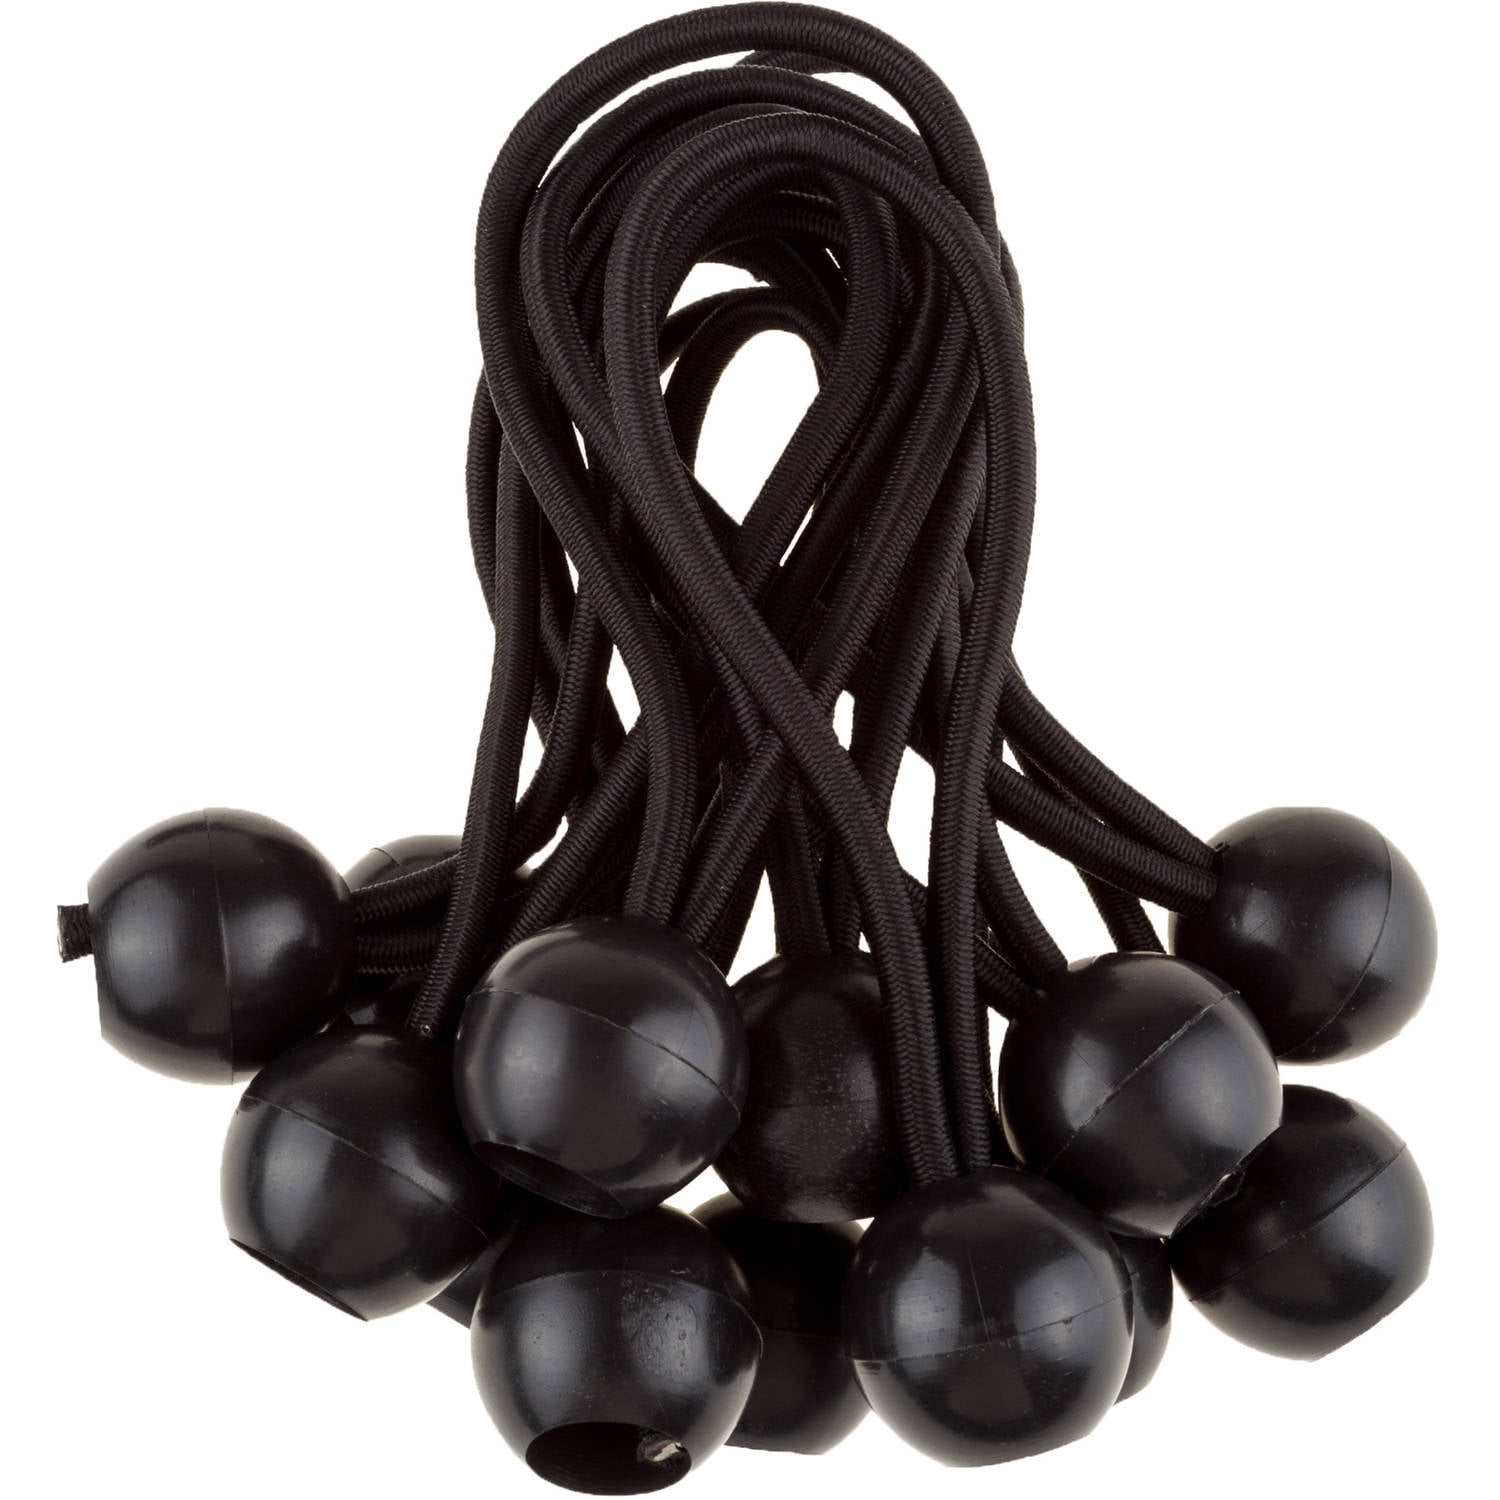 Ball Bungee Cords 12 Pack With The Weather Resistant Black 6 Ball Bungee Cords By Stalwart Walmart Com Walmart Com